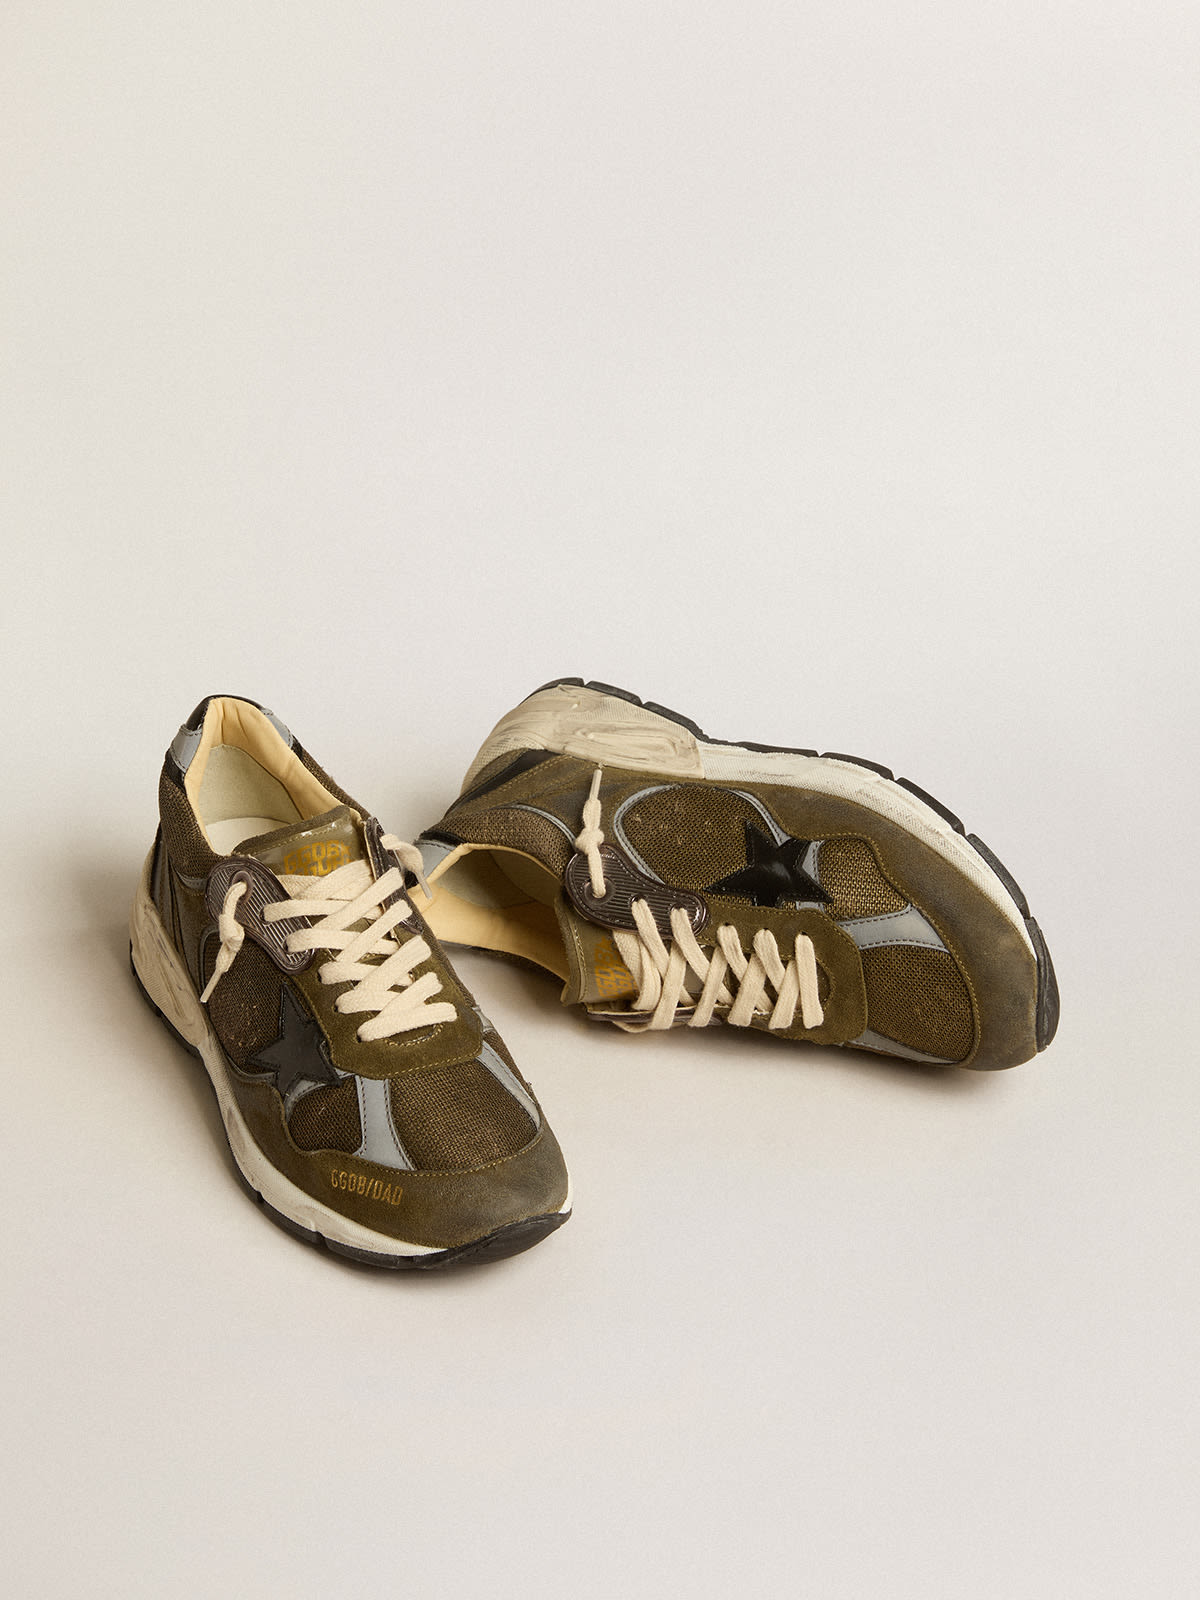 Golden Goose - Women’s Dad-Star in suede and mesh with black leather star and heel tab in 